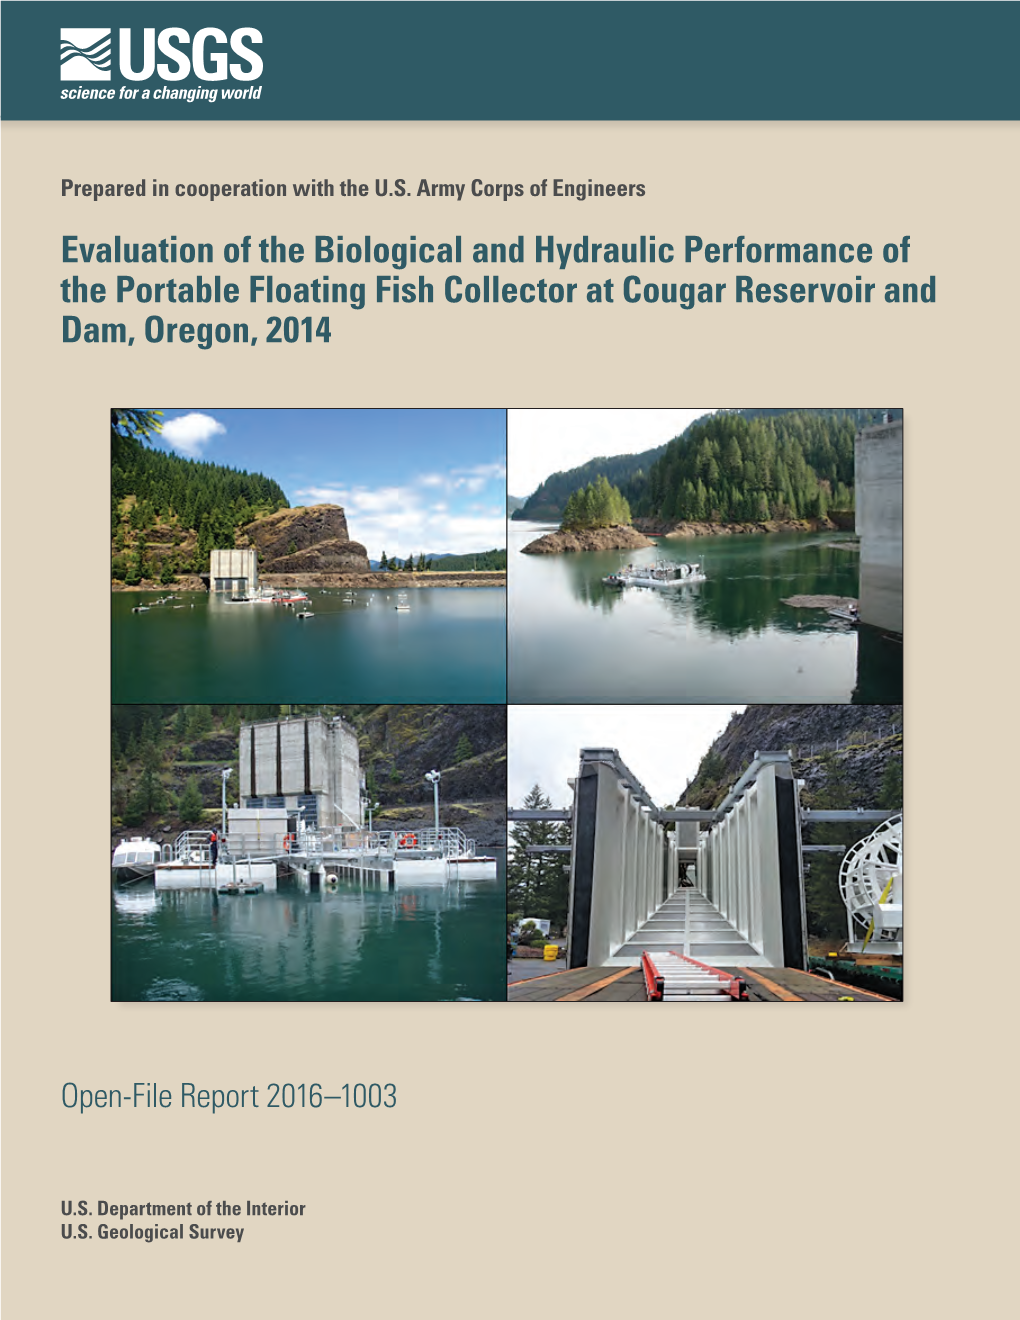 Evaluation of the Biological and Hydraulic Performance of the Portable Floating Fish Collector at Cougar Reservoir and Dam, Oregon, 2014